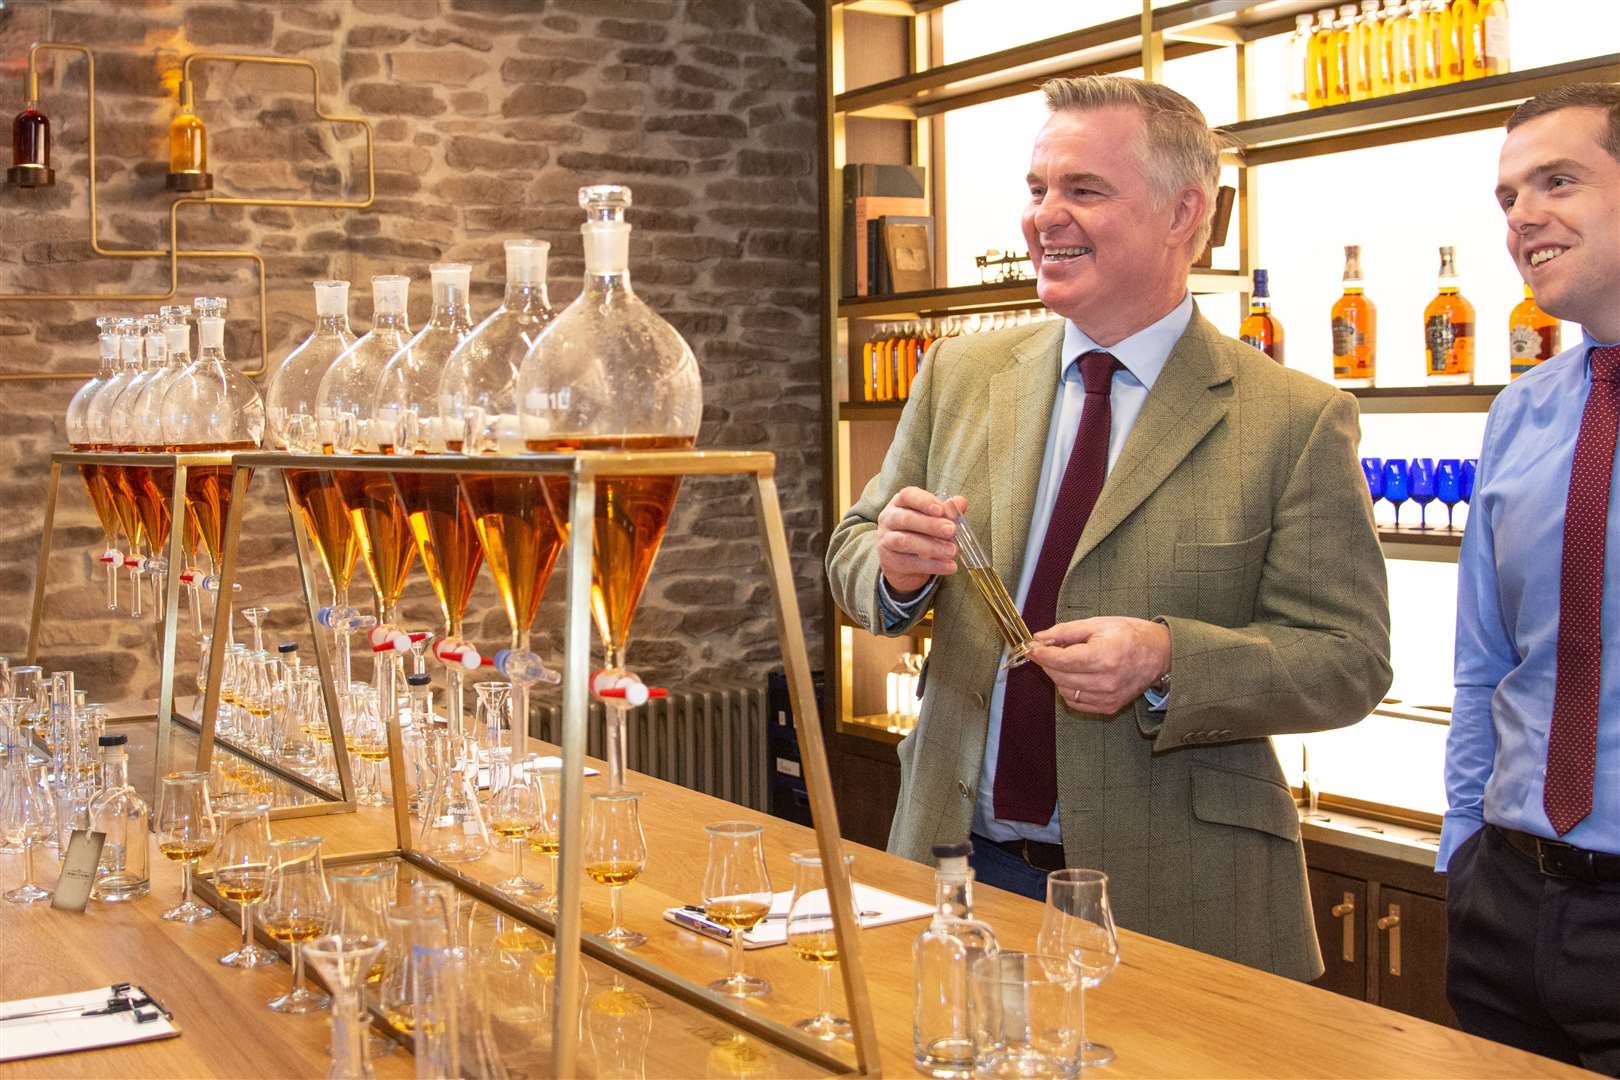 Gordon MP Colin Clark visited Strathisla Distillery in his role as parliamentary under-secretary of state for Scotland.